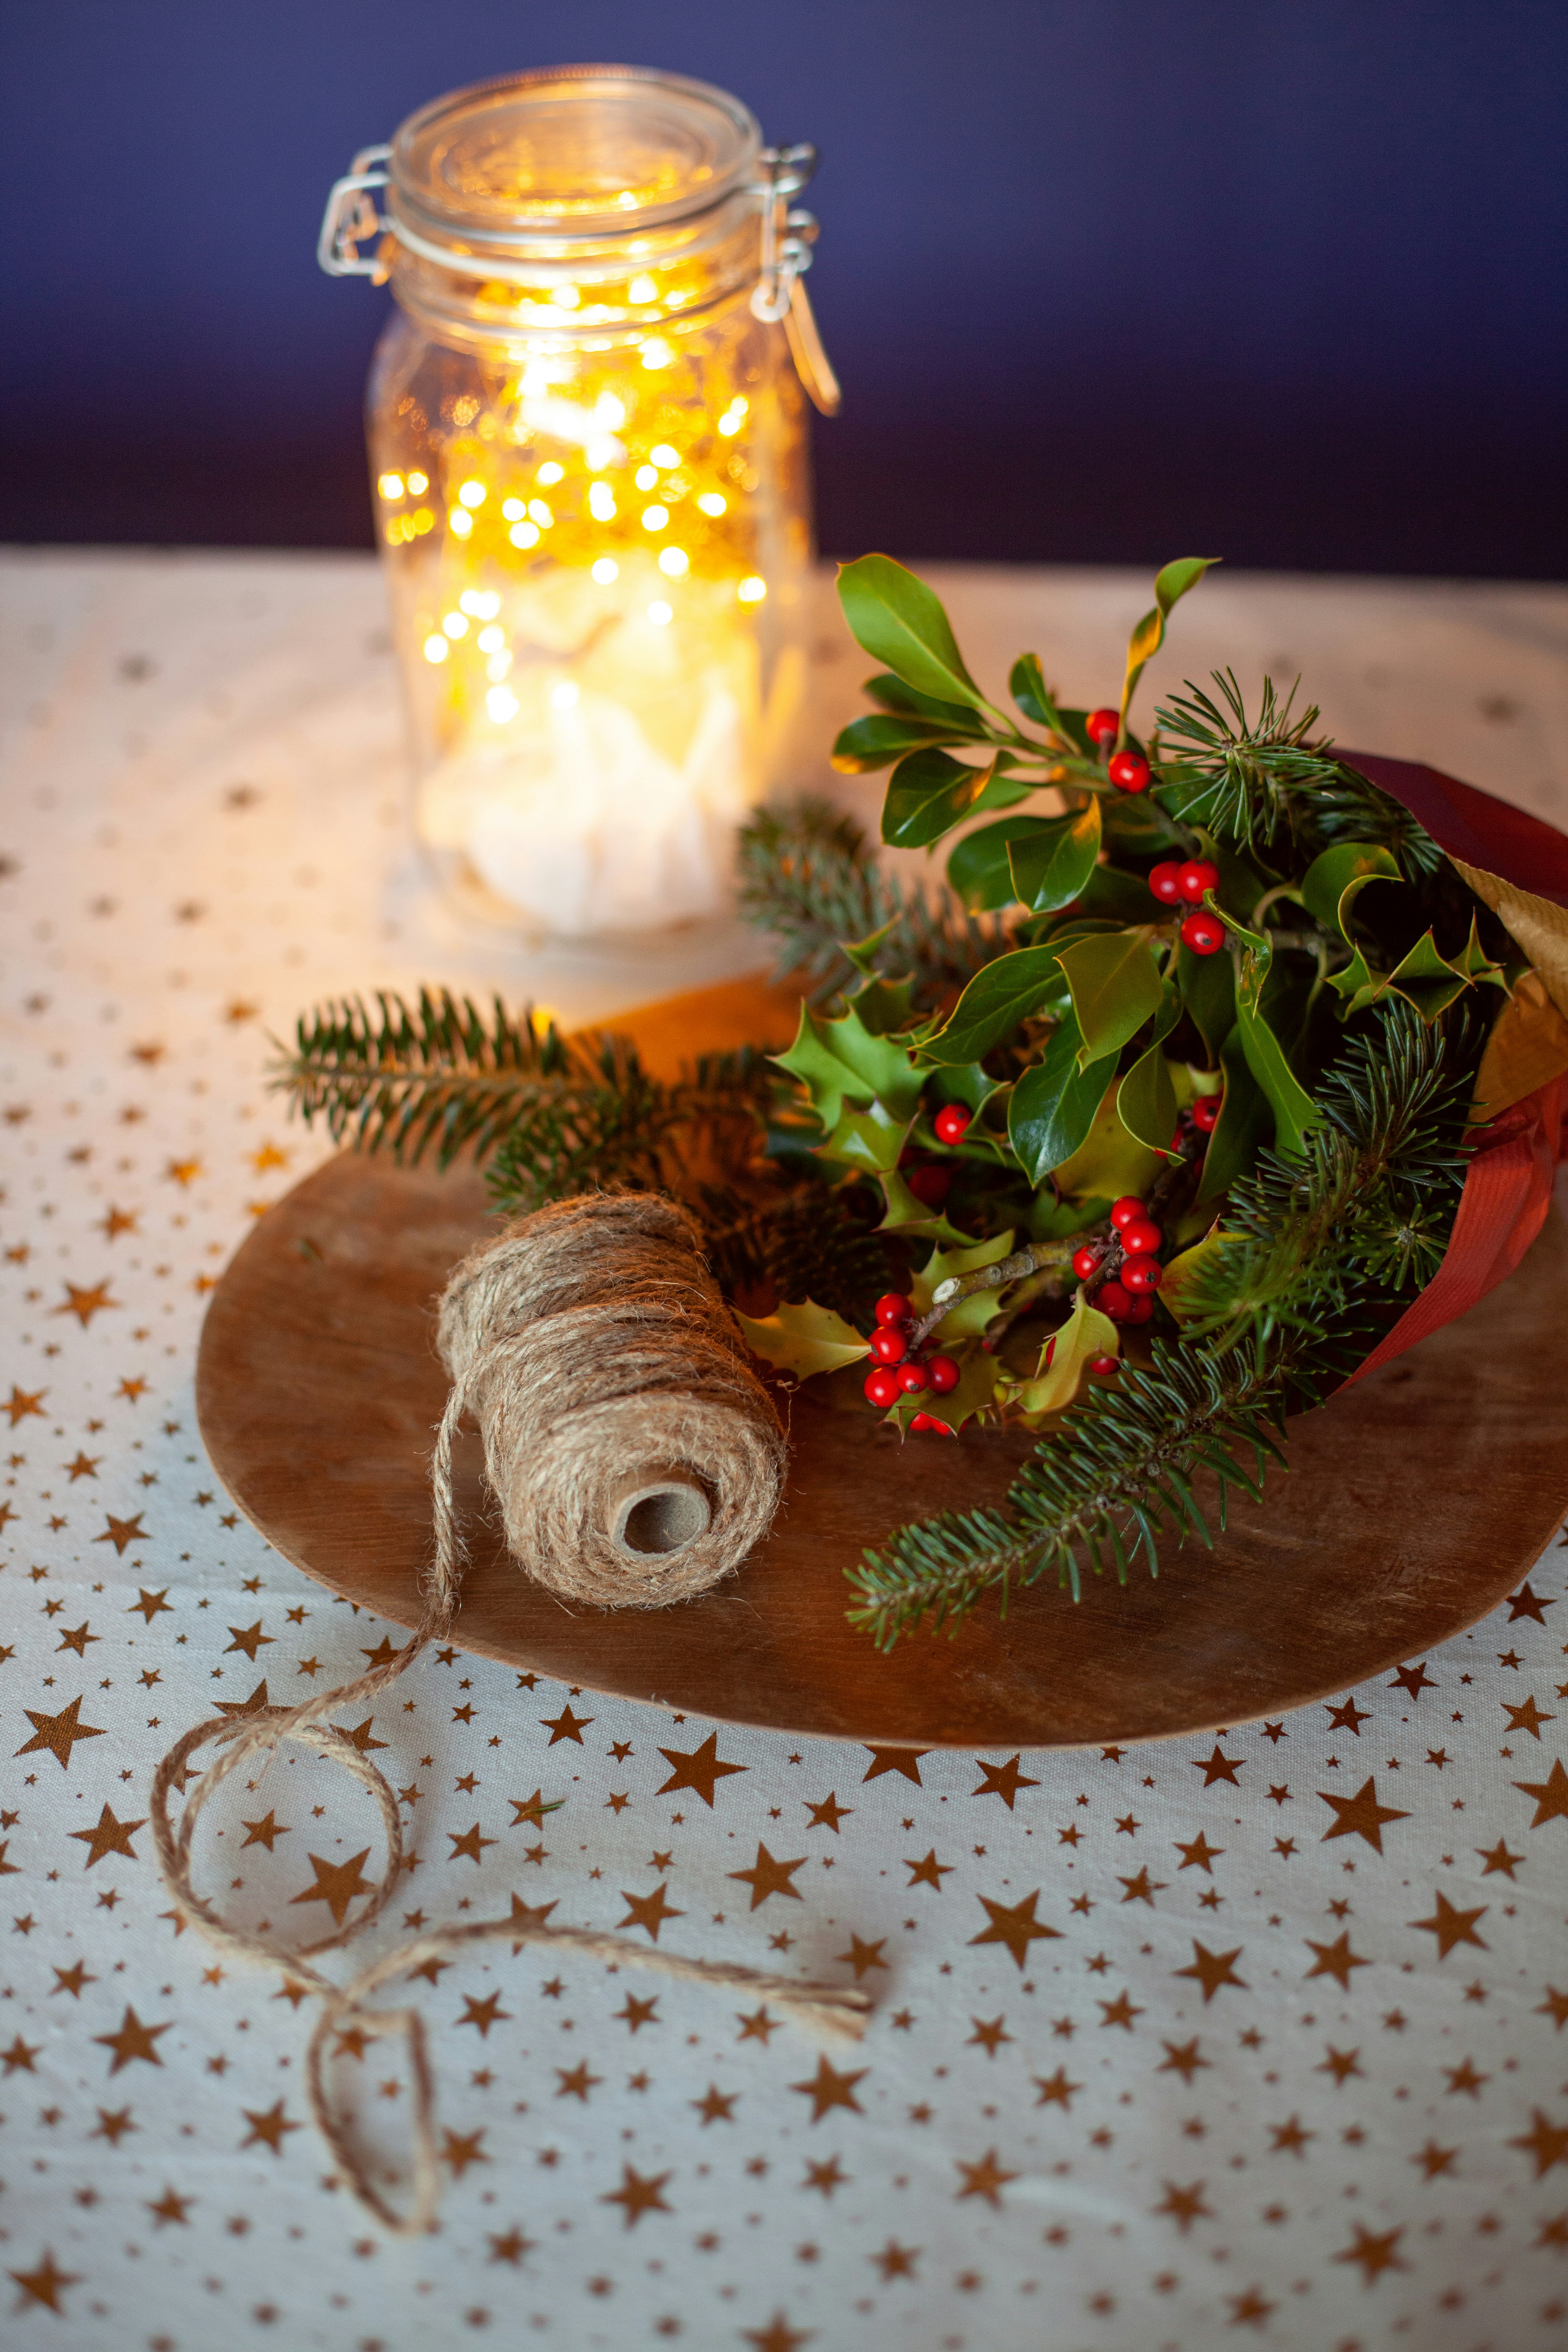 brown and white round ornament on brown wooden table